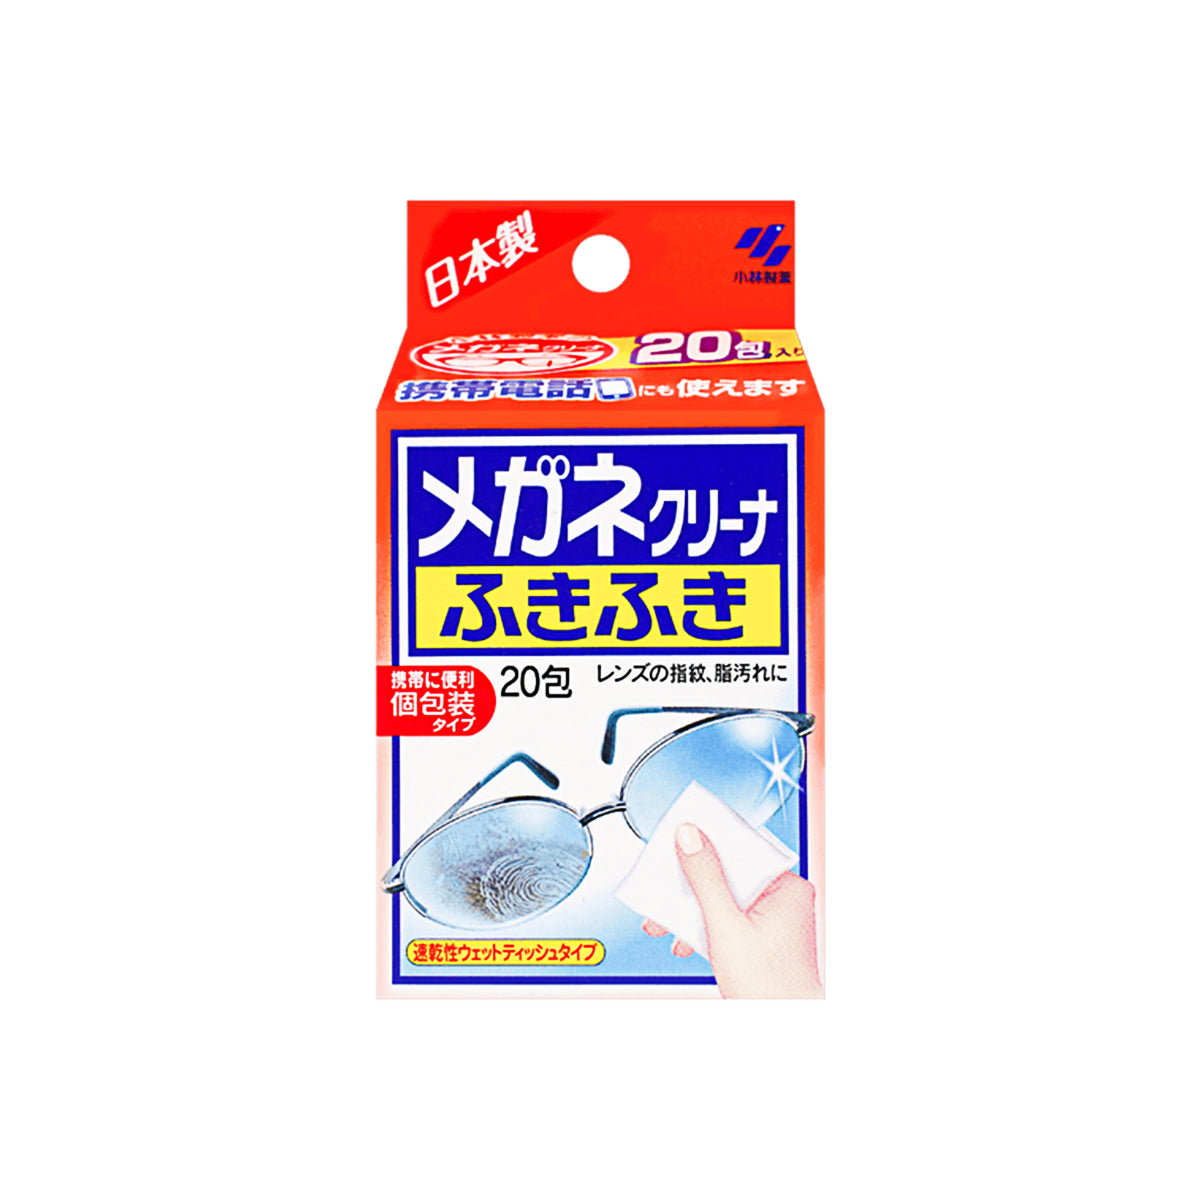 Clear Wipes Lens Cleaner 20pcs